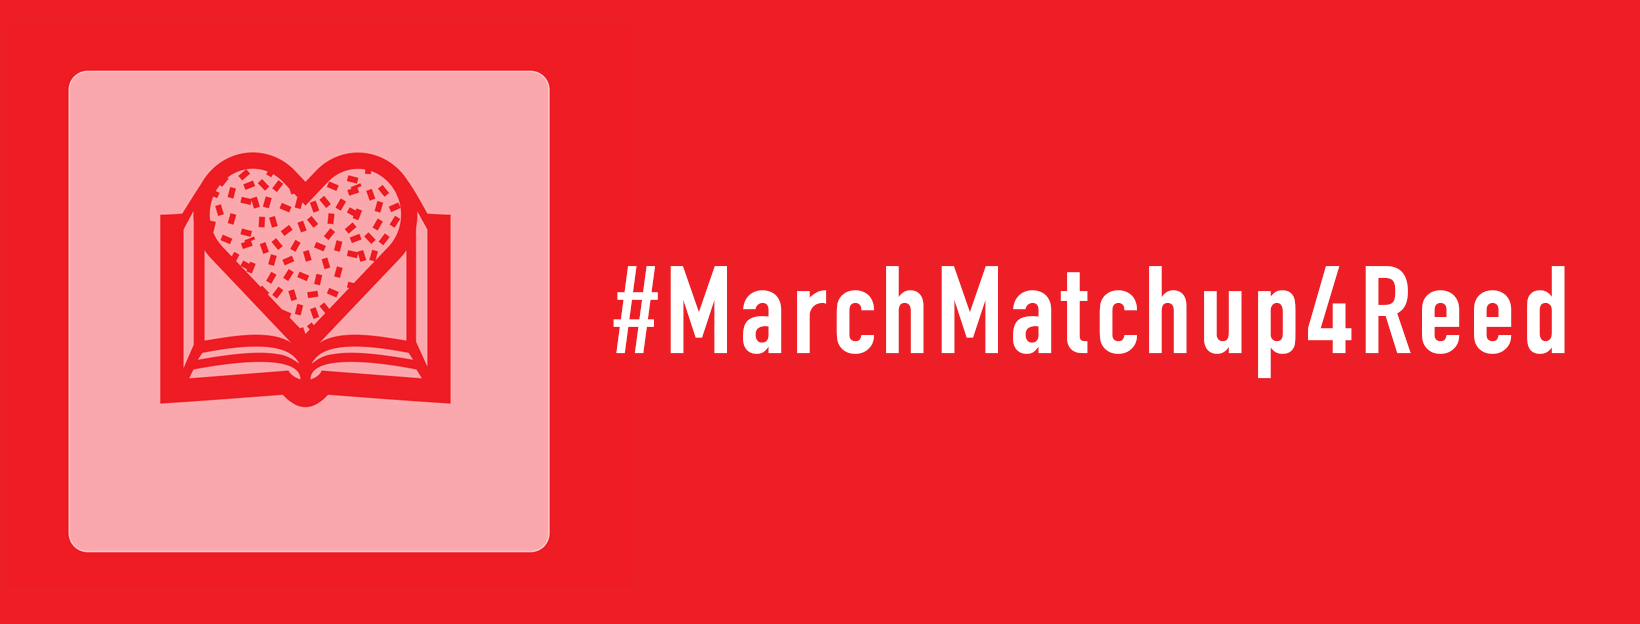 March Match Facebook cover image with heart